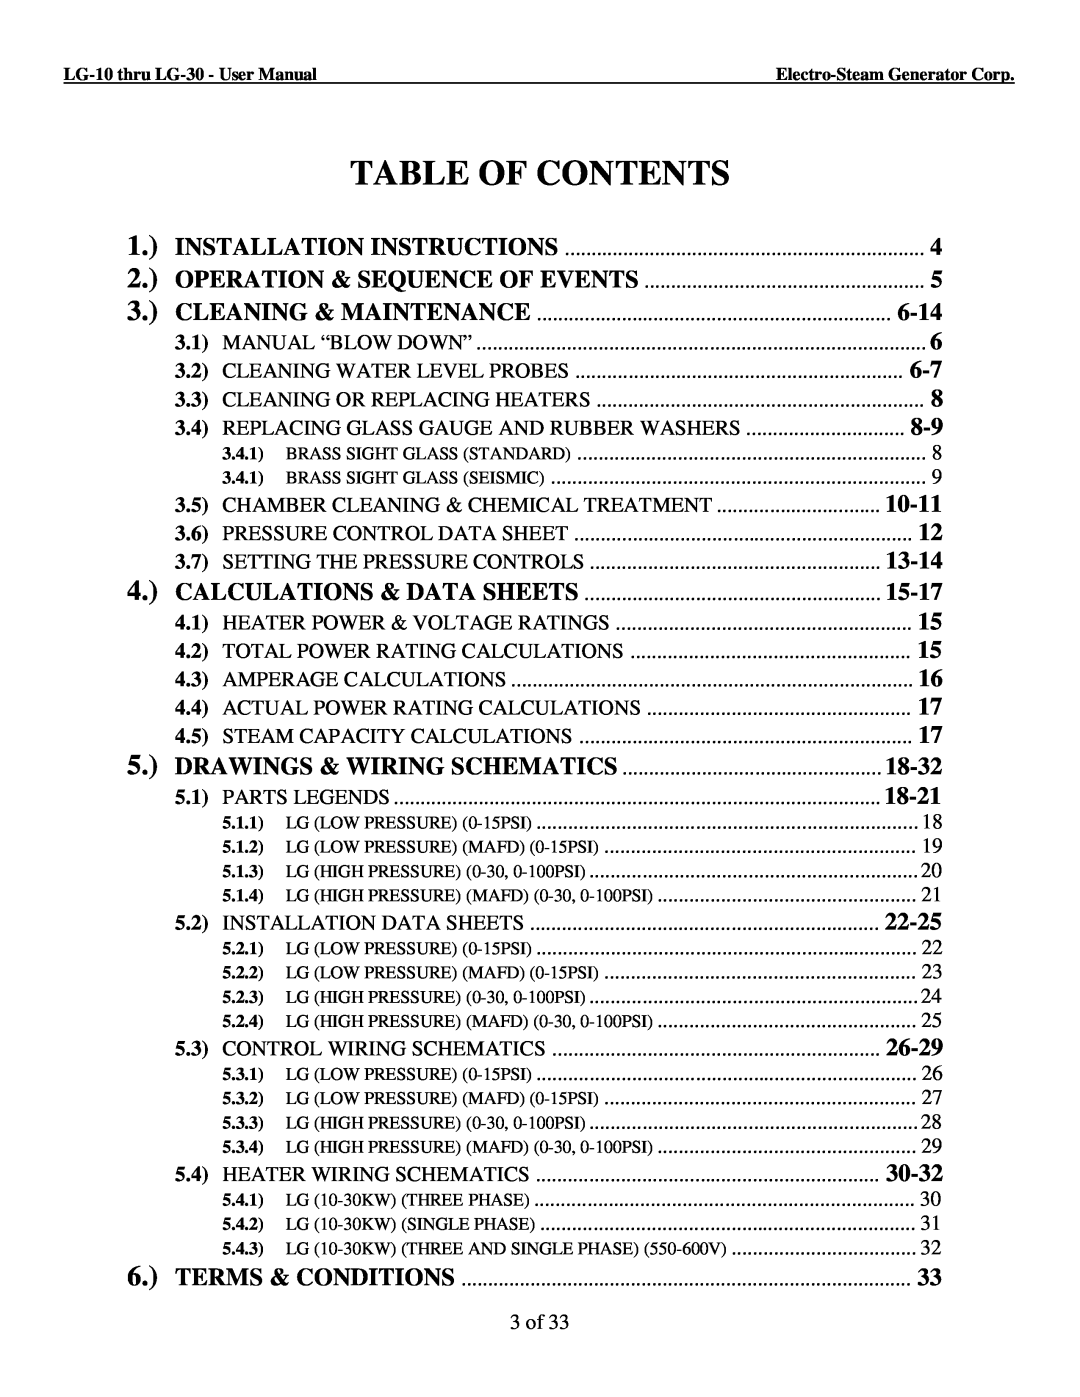 LG Electronics user manual Table Of Contents, 6-14, 10-11, 13-14, 15-17, 18-32, 18-21, 22-25, 26-29, 30-32 